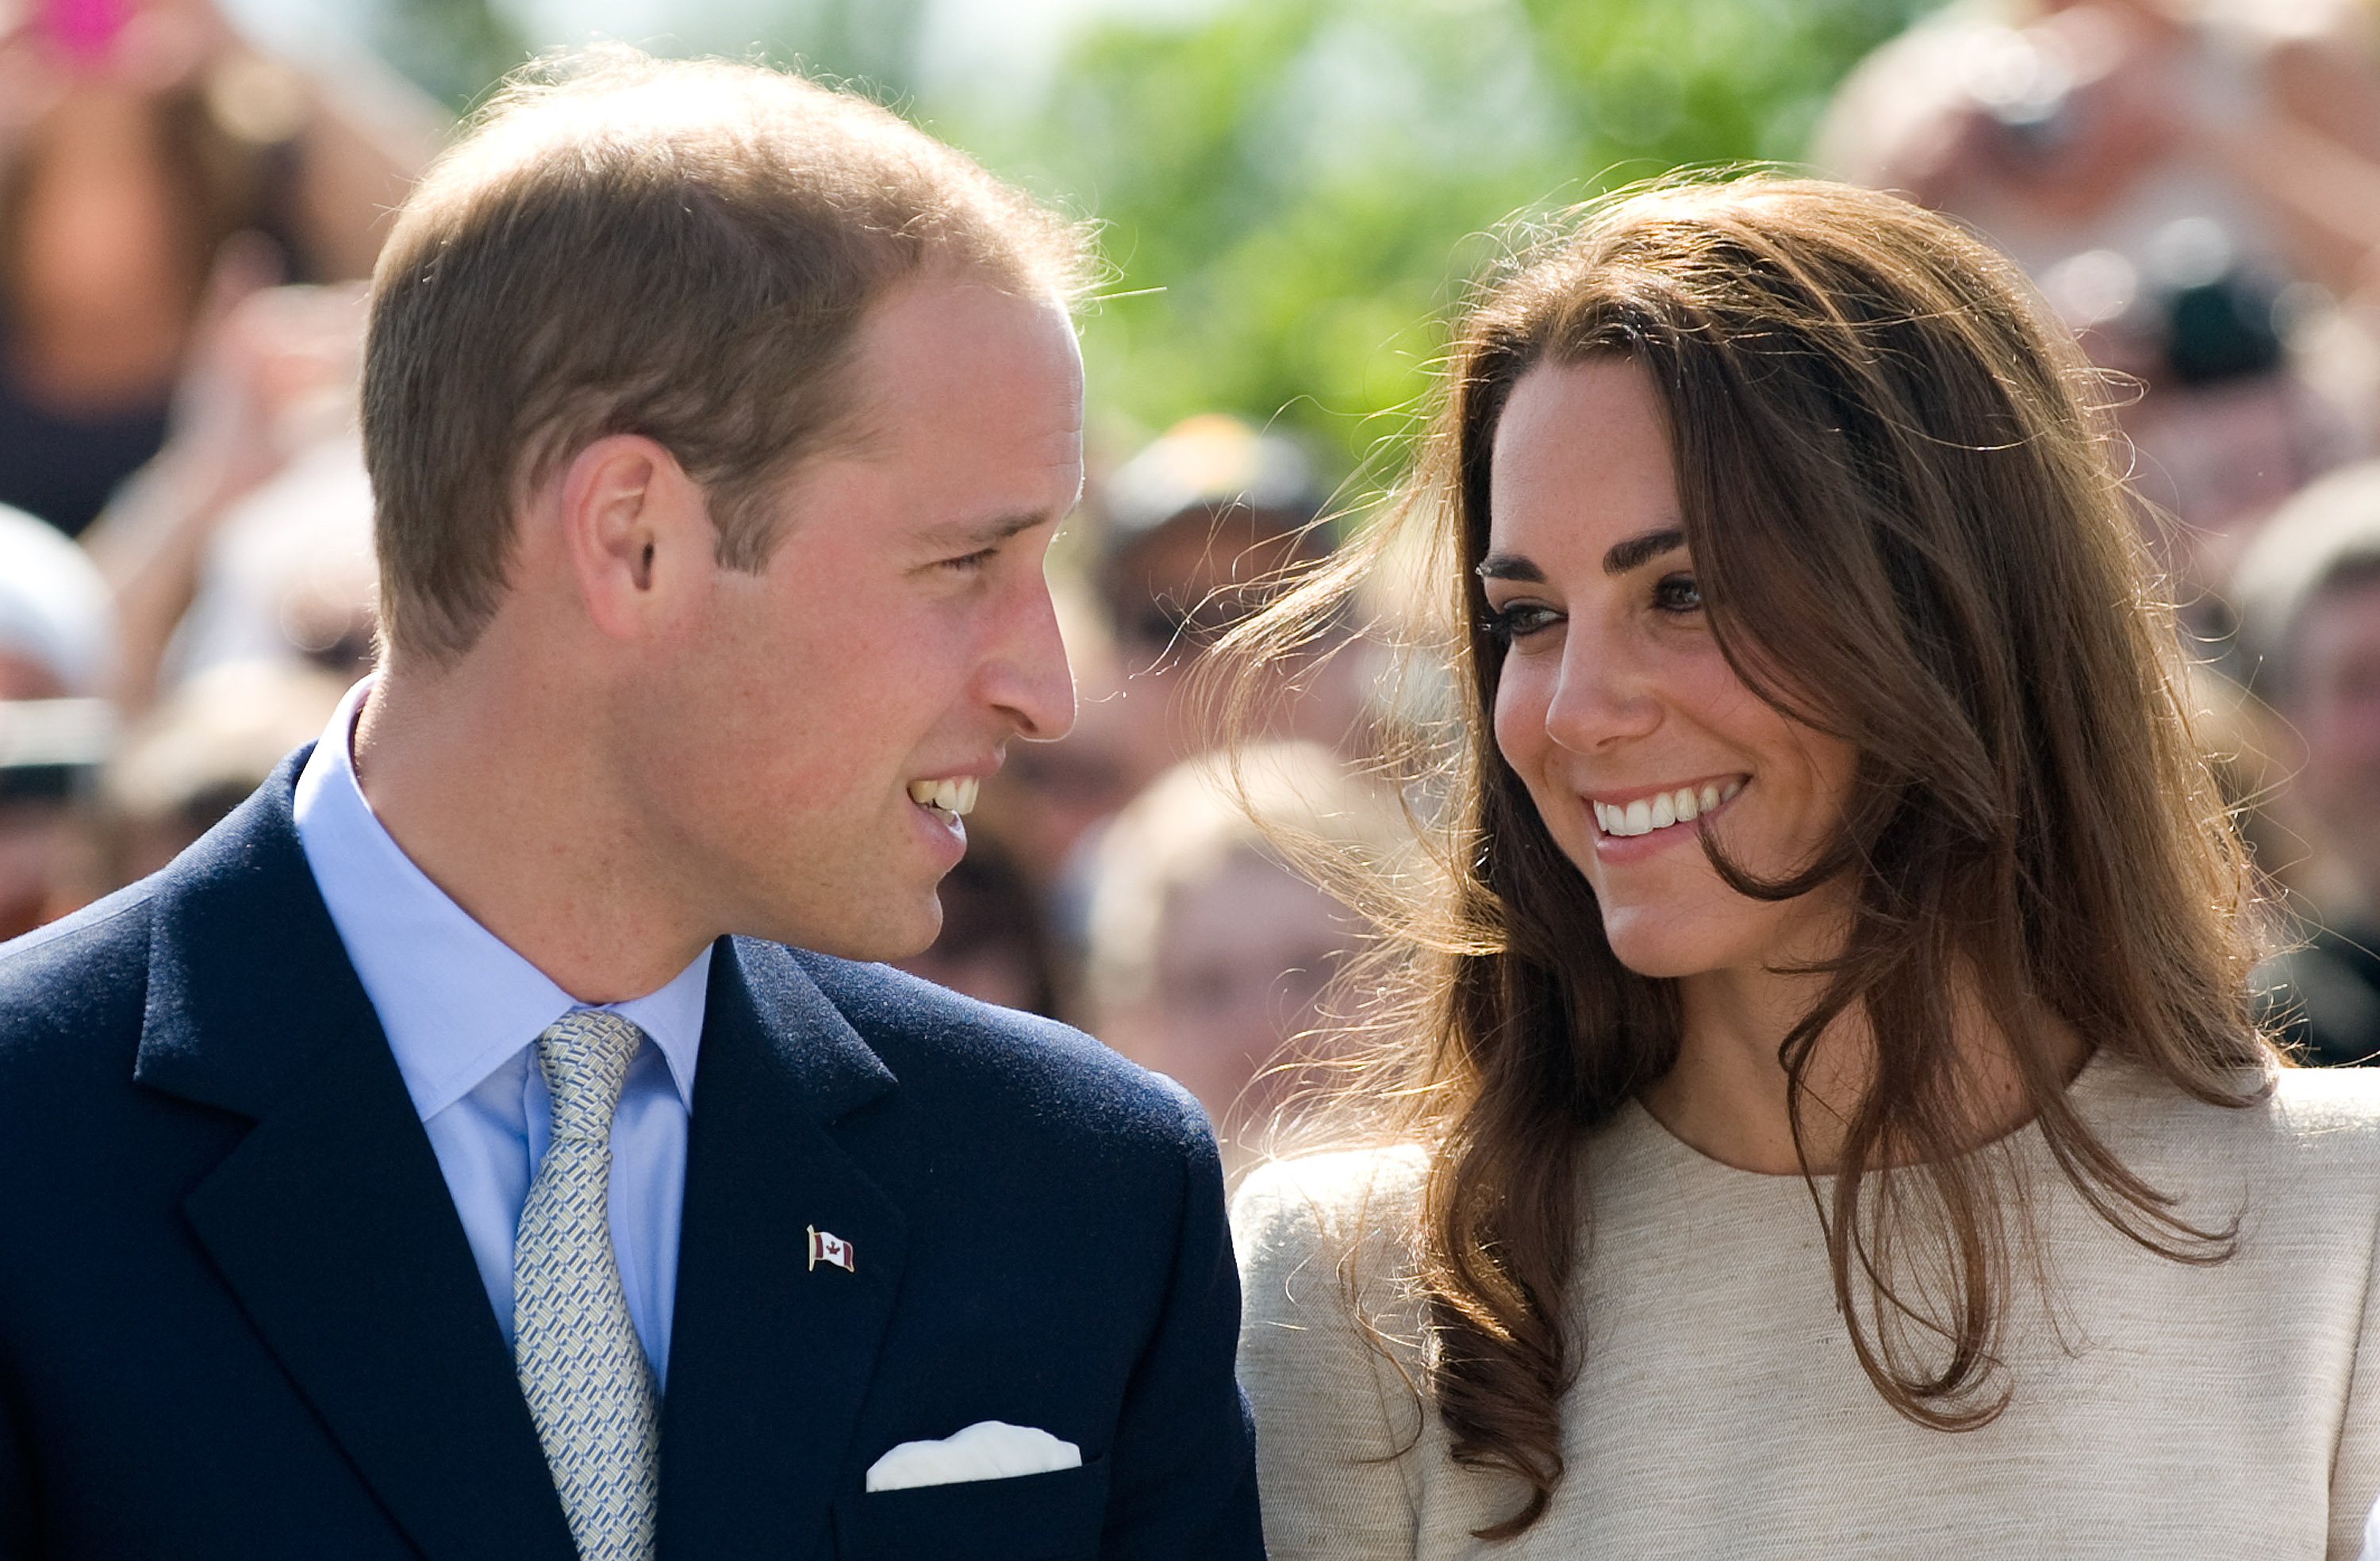 The Duke And Duchess Of Cambridge North American Royal Visit - Day 6